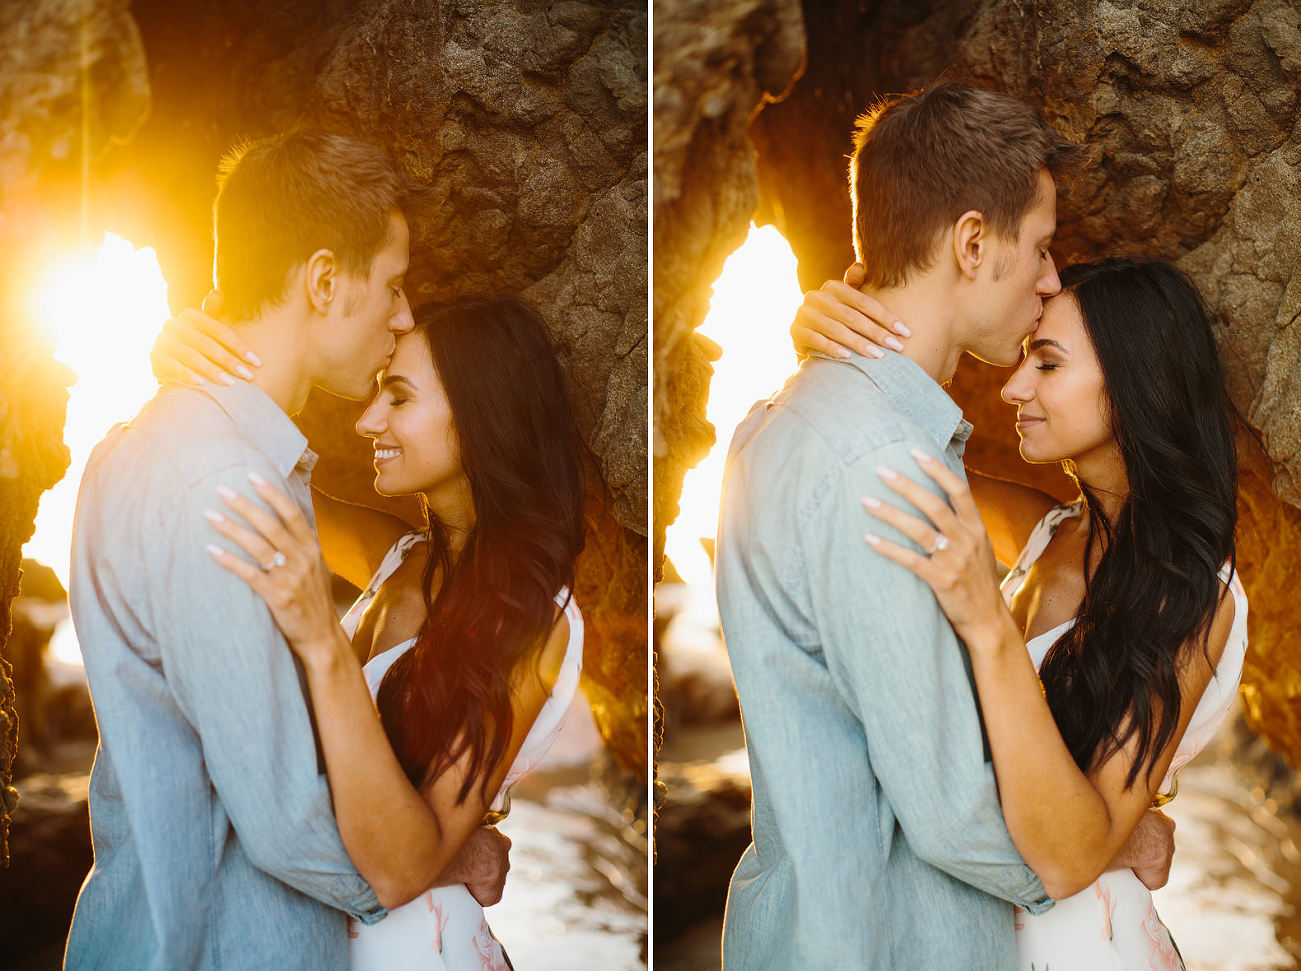 two photos of couple close and holding eachother engagement pose